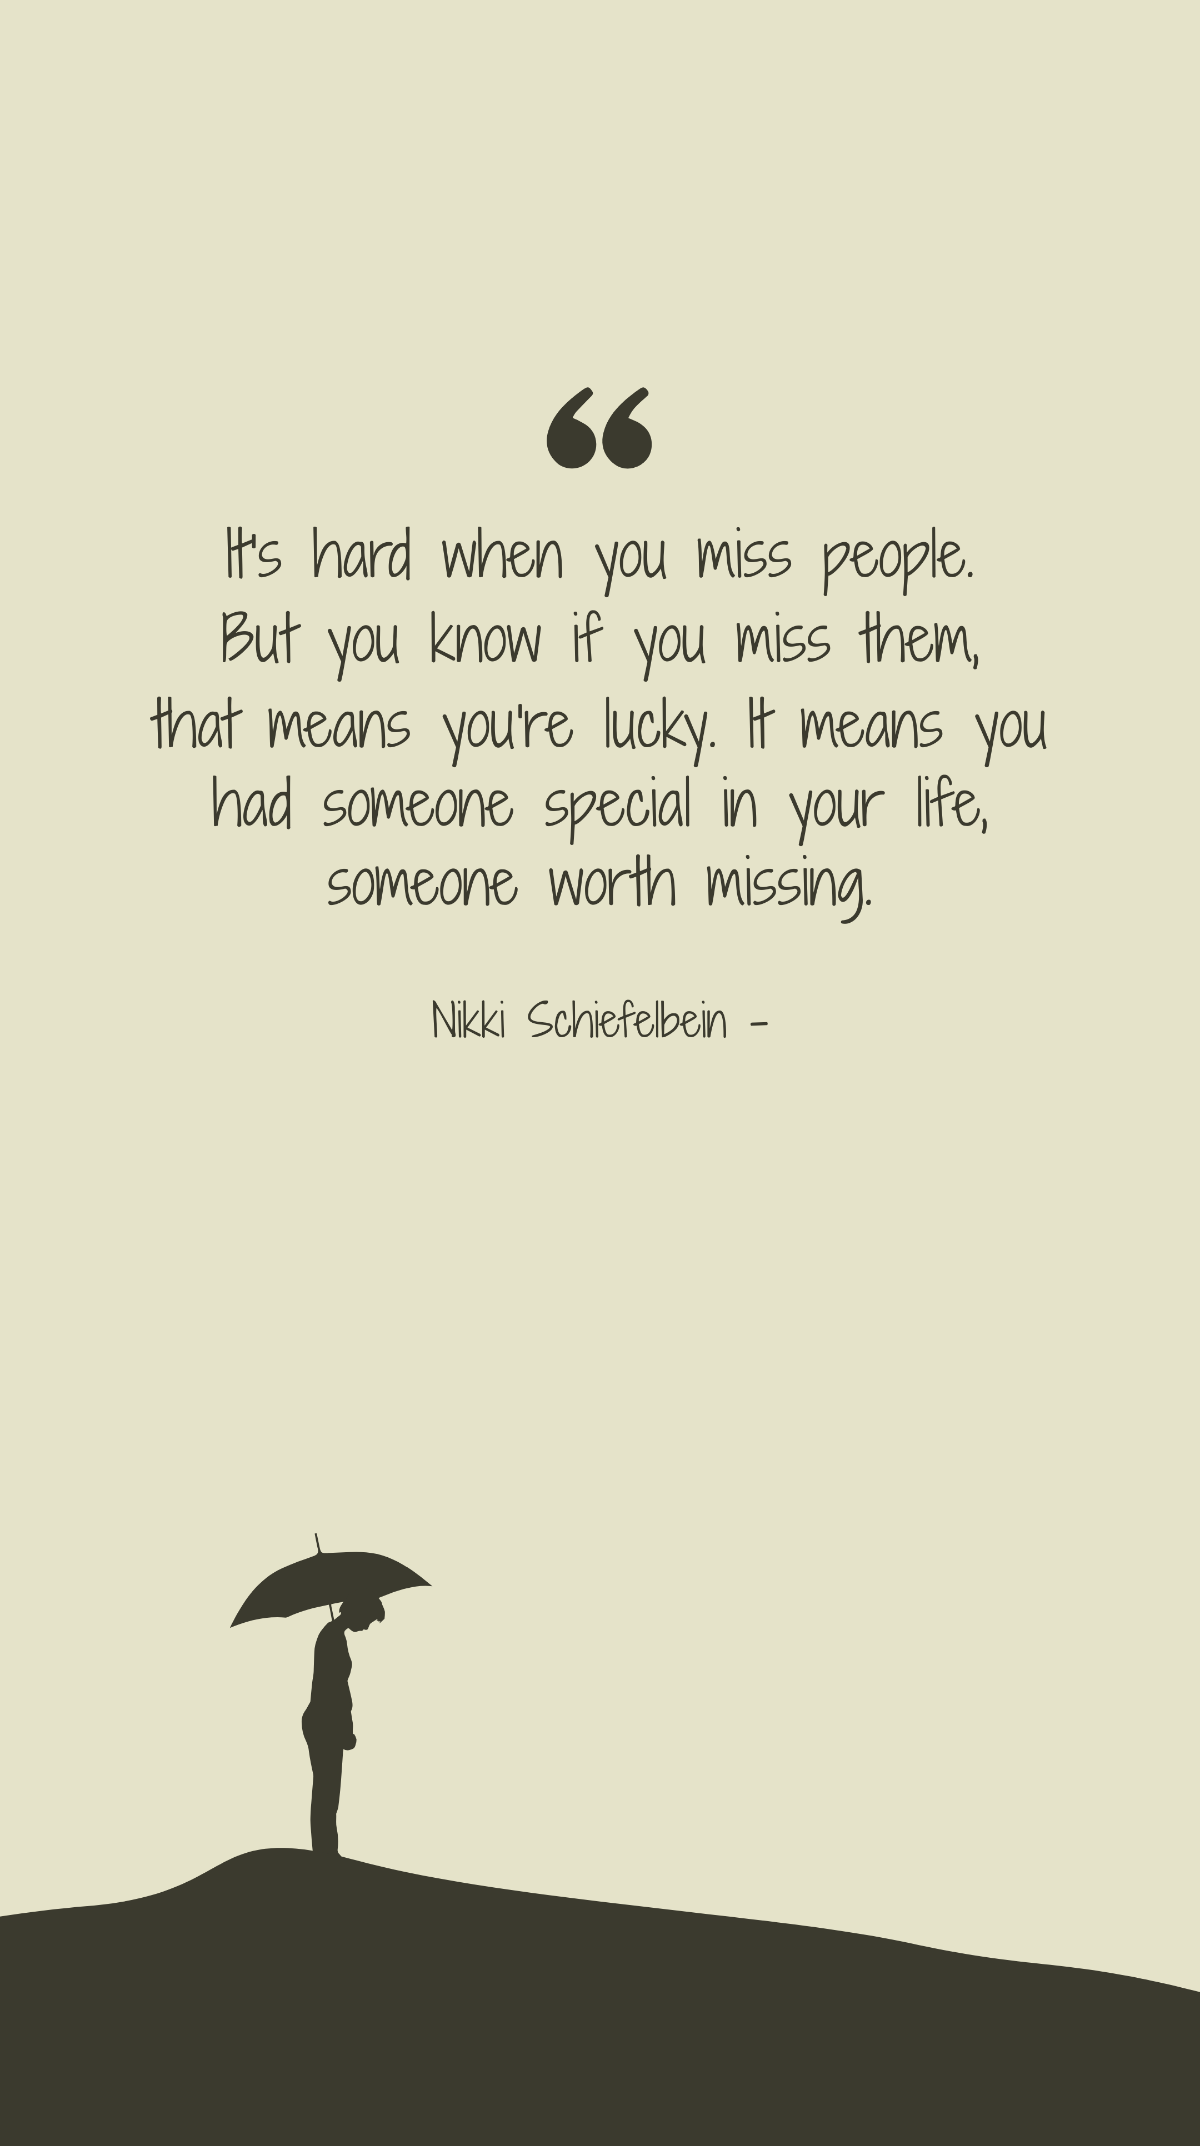 Nikki Schiefelbein - It's hard when you miss people. But you know if you miss them, that means you're lucky. It means you had someone special in your life, someone worth missing.